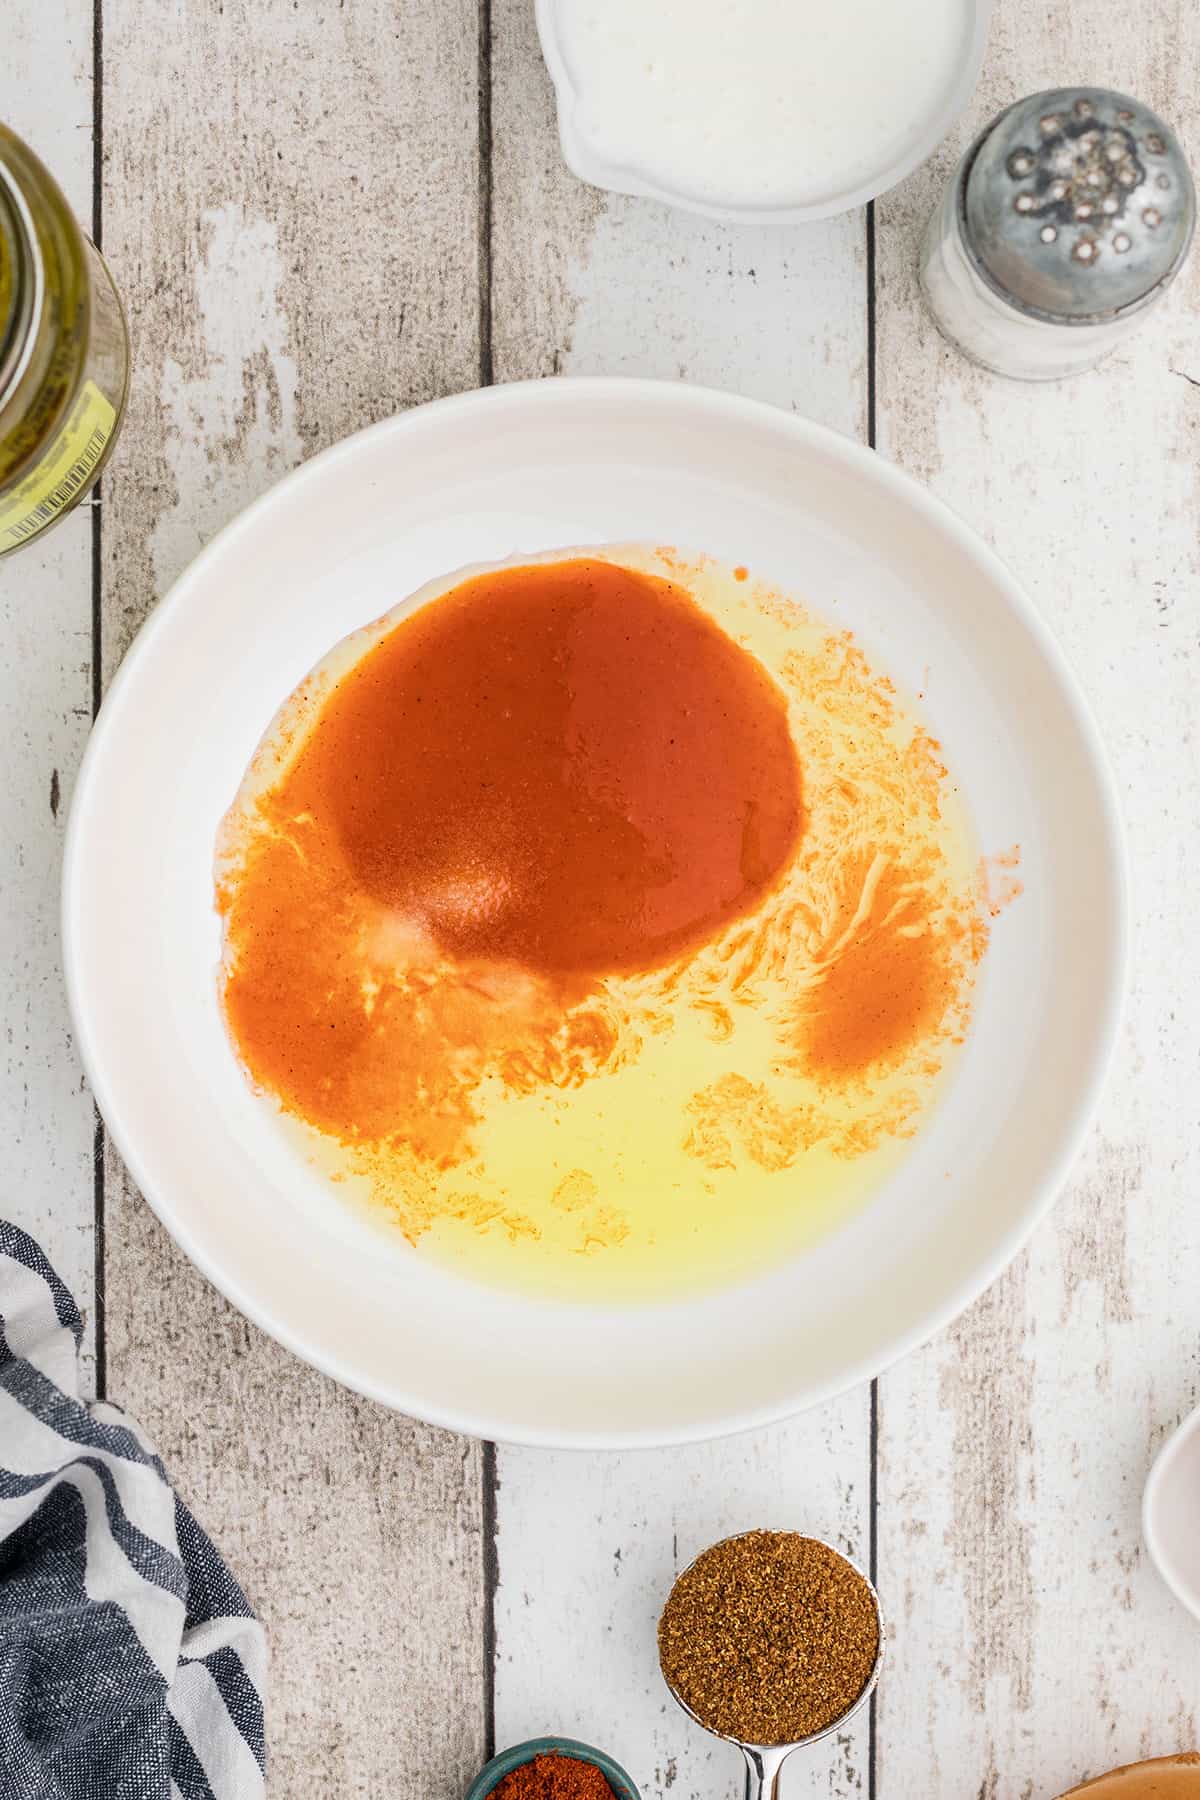 Pickle juice, hot sauce, and salt in a shallow bowl.